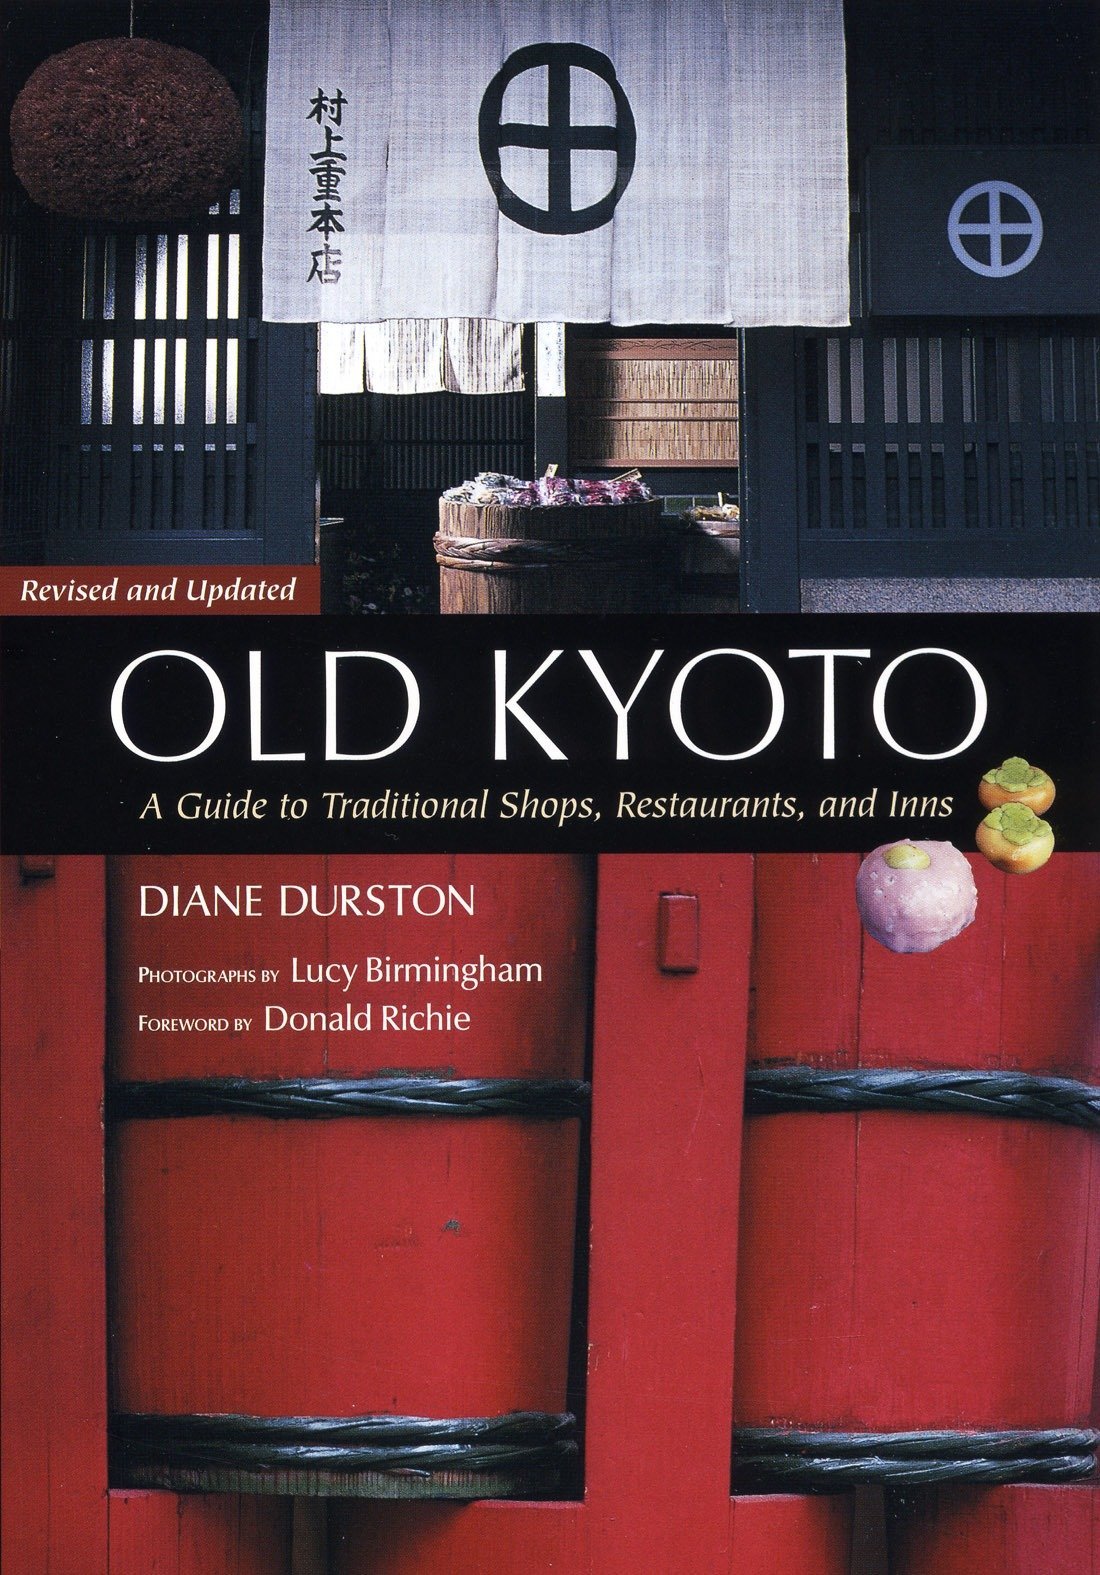 Old Kyoto: A Guide to Traditional Shops, Restaurants and Inns